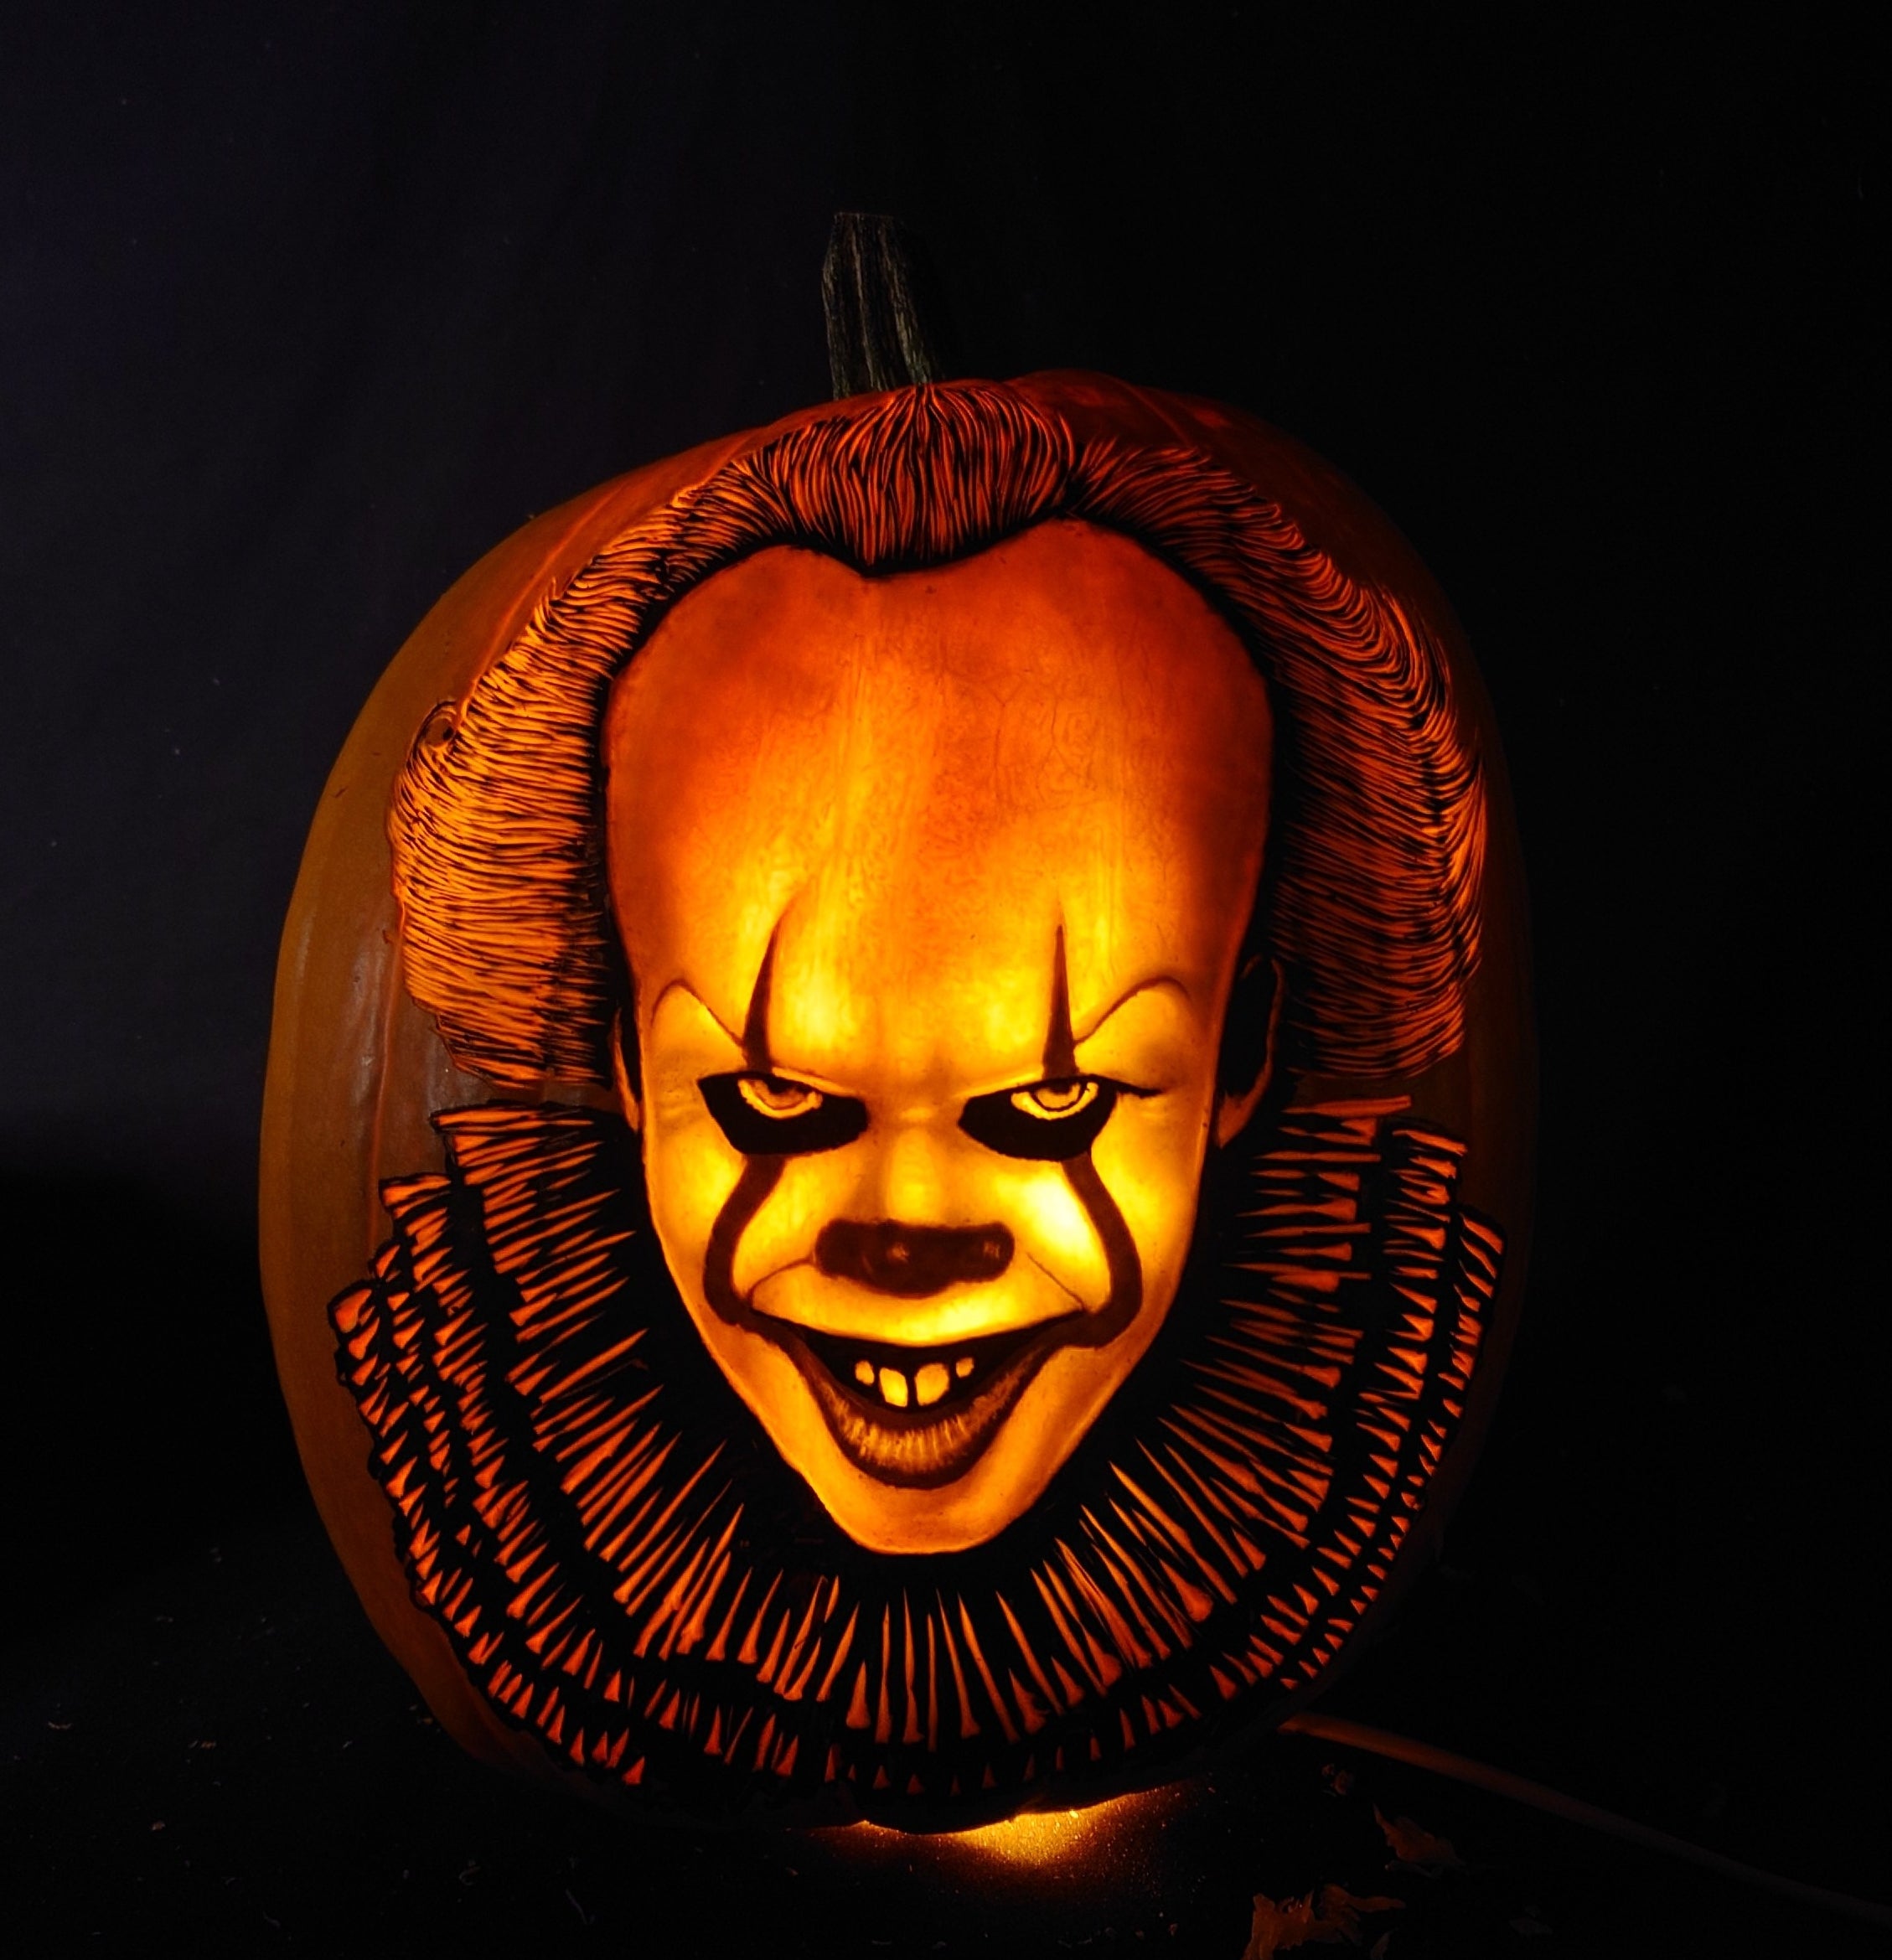 Pennywise (IT) carved on a Pumpkin